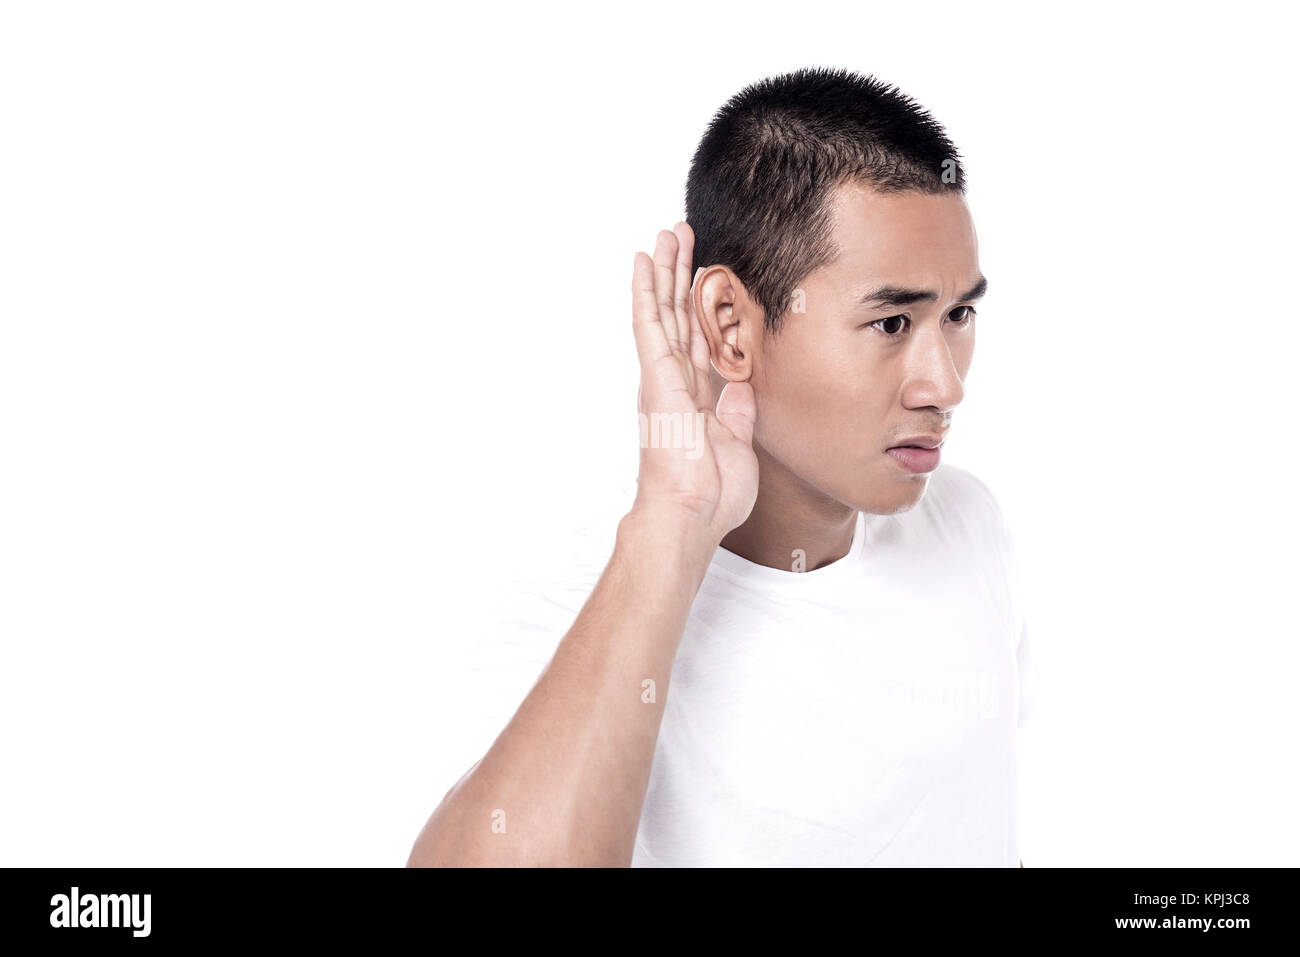 Cant't hear you clearly! Stock Photo